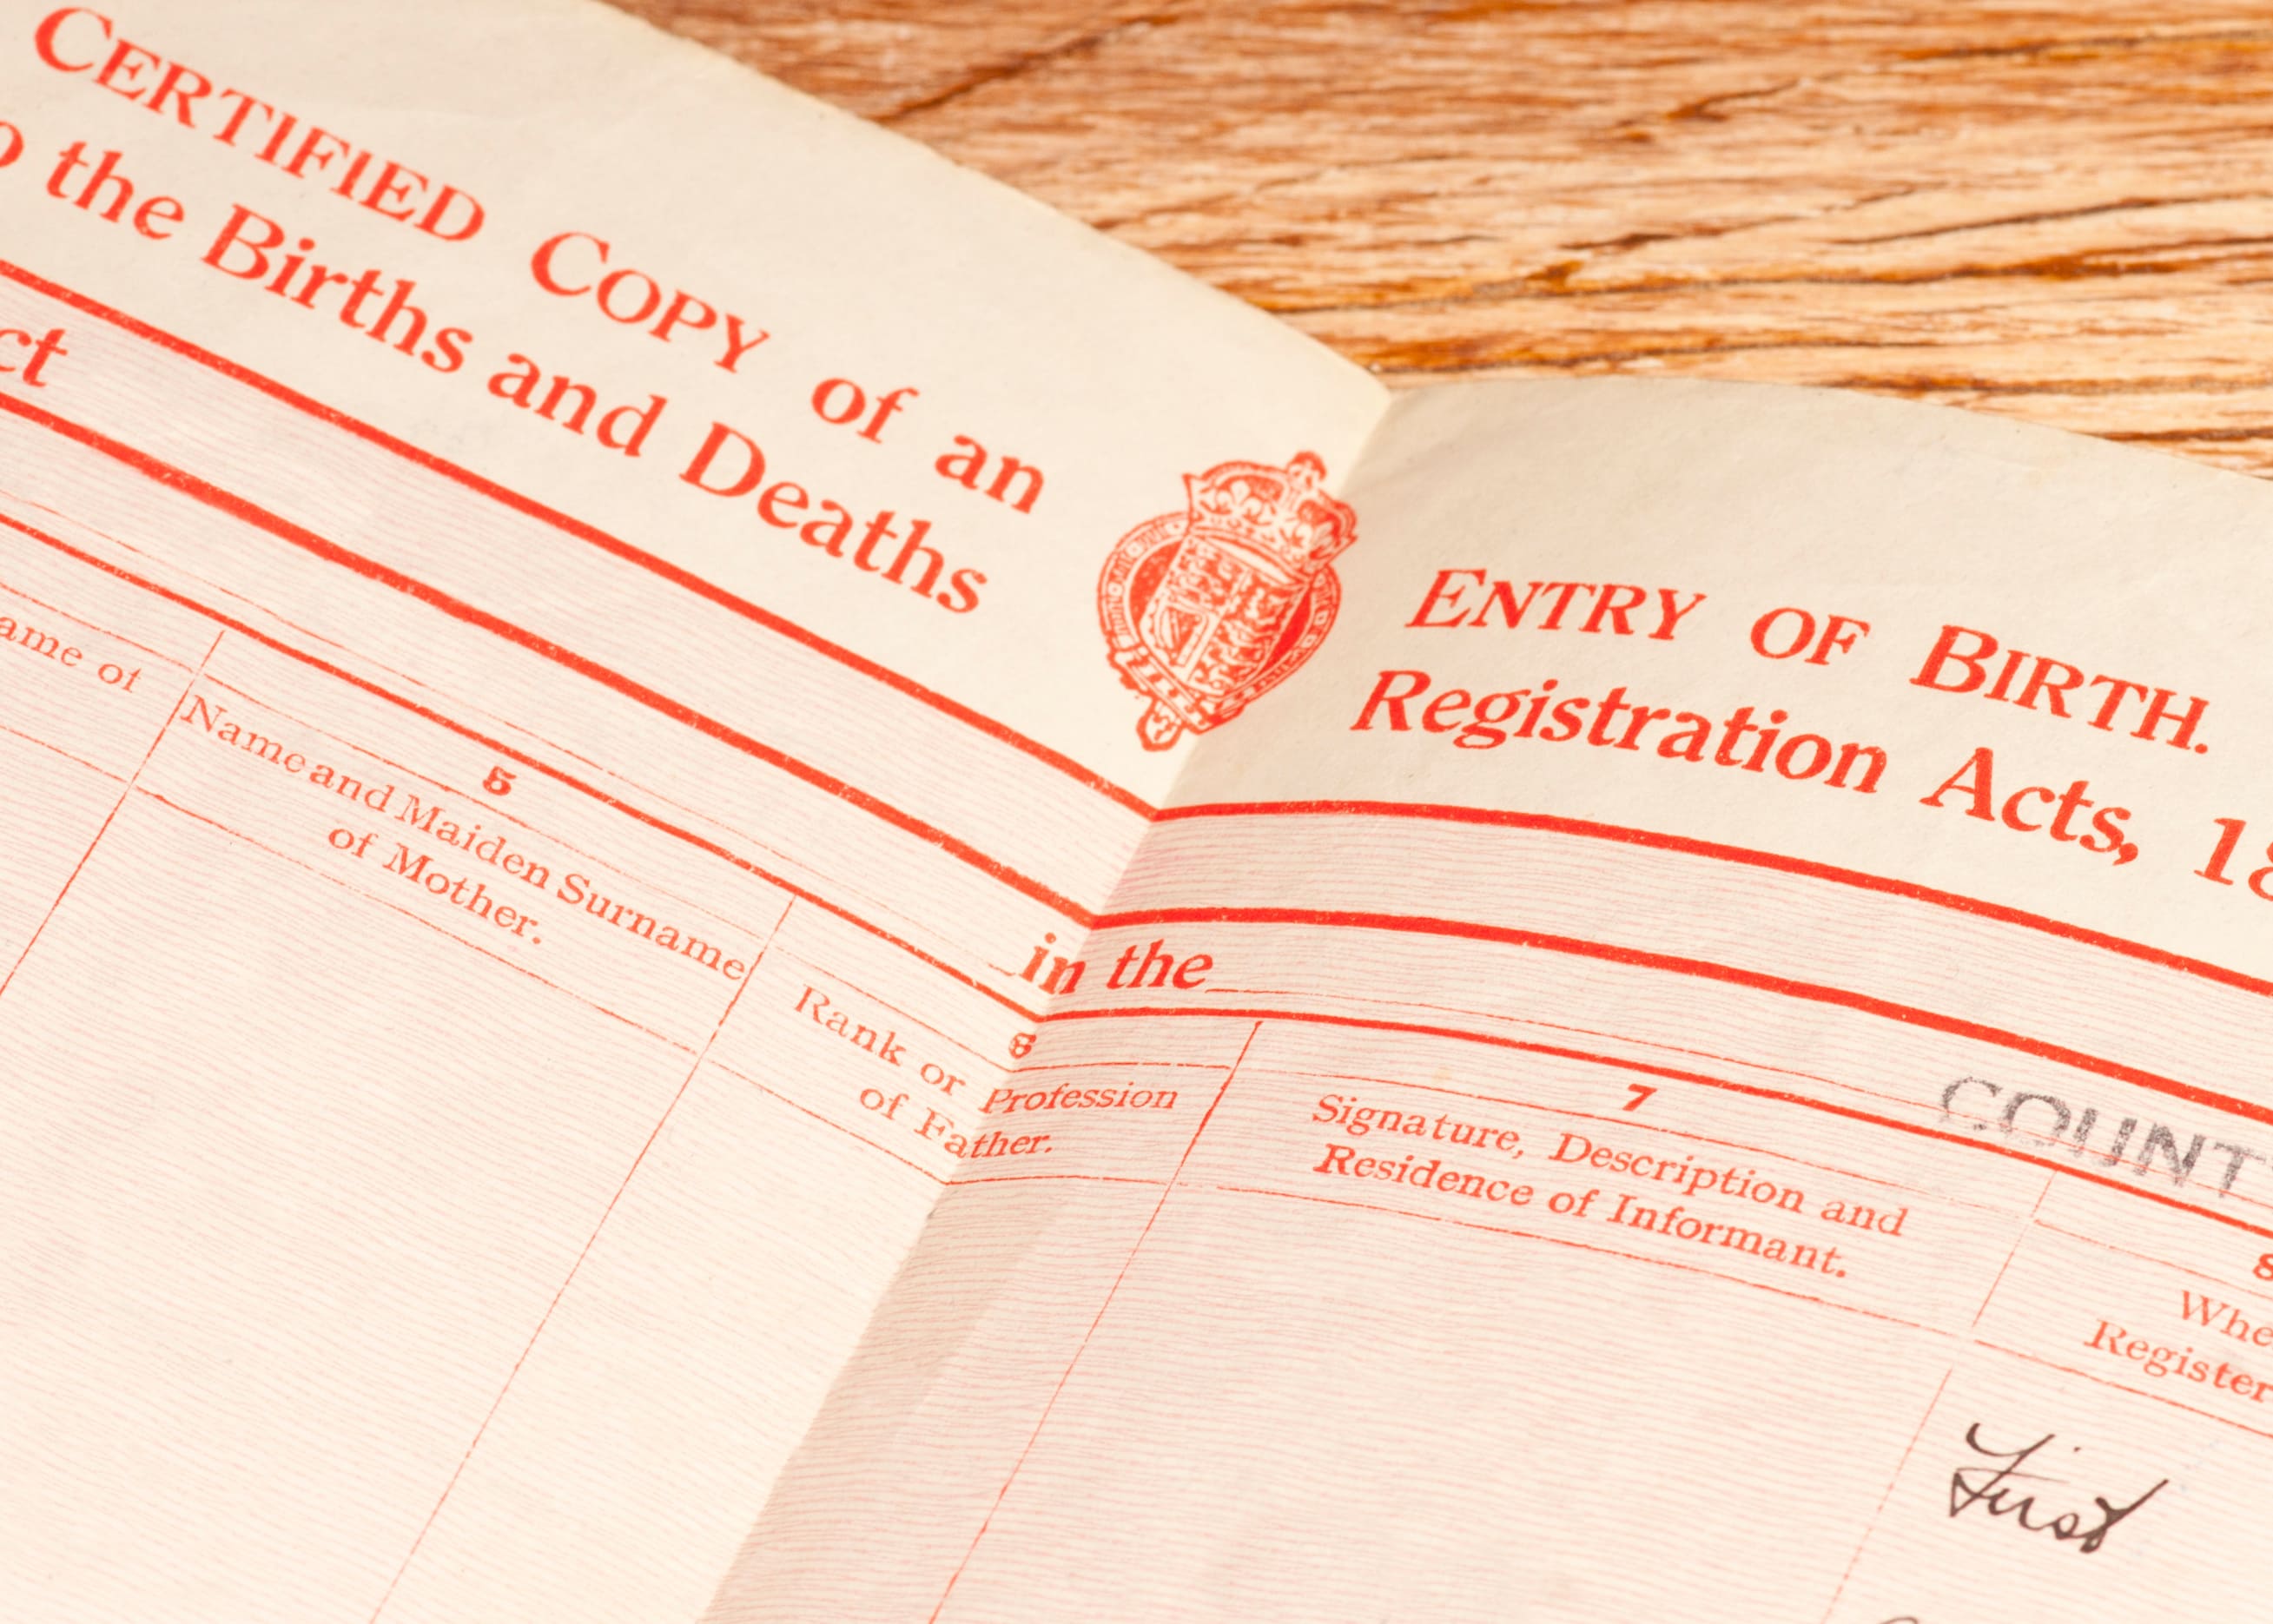 Certfied copy of birth and death records